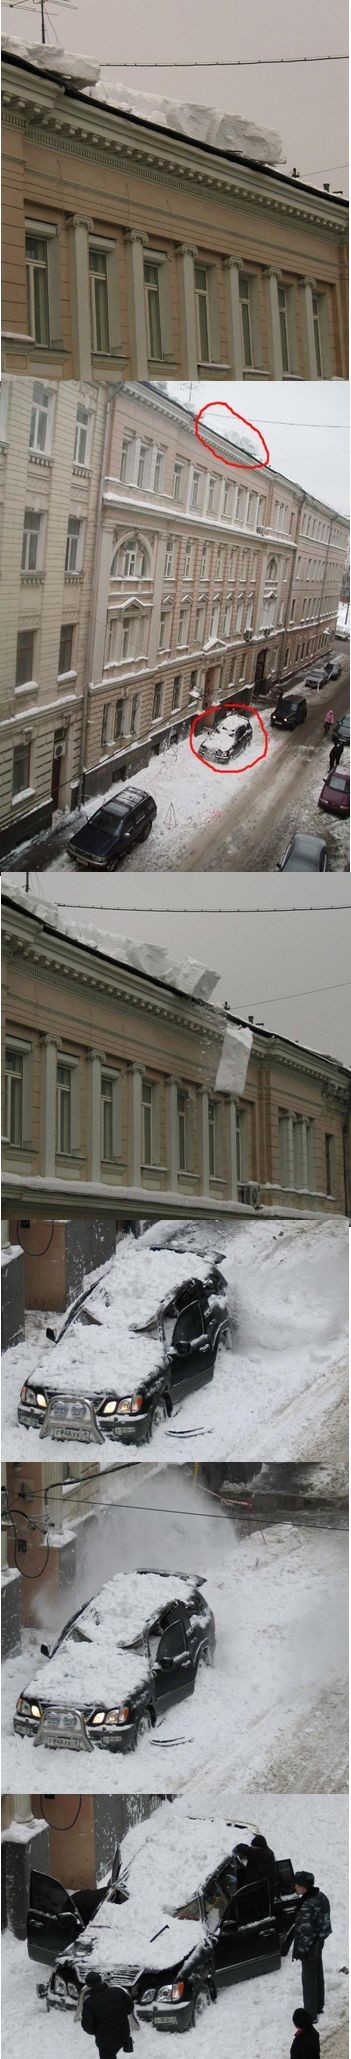 You really have to watch where you park your Lexus SUV in Russia.